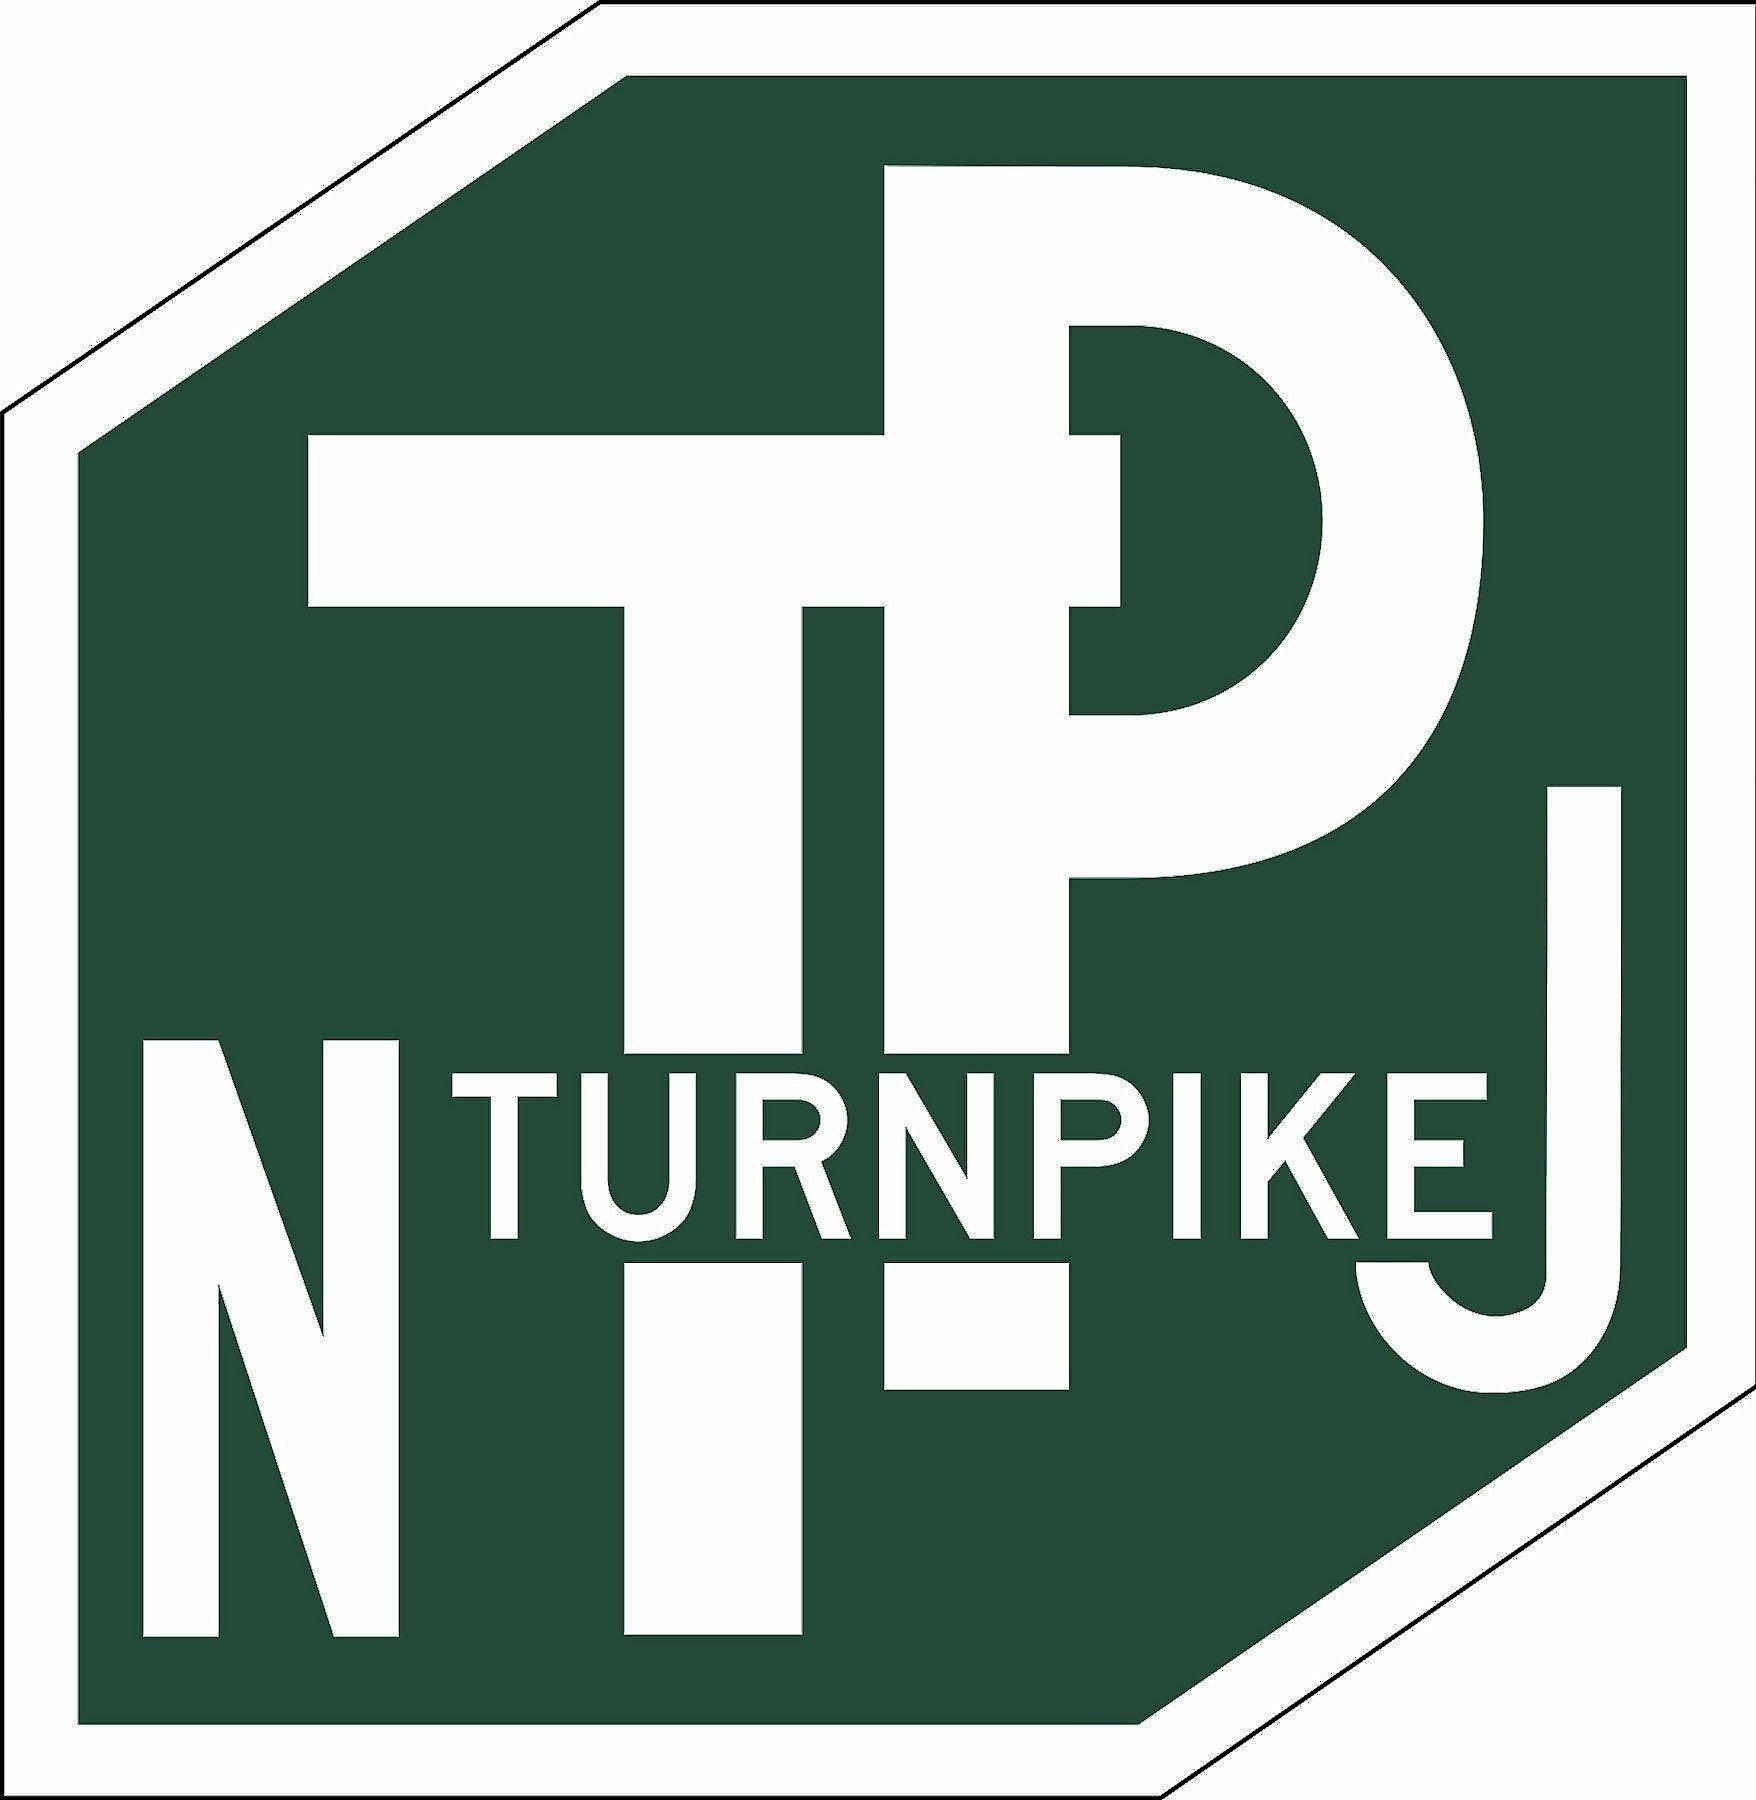 New Jersey Logo - New Jersey turnpike considering selling merchandise with logo - The ...